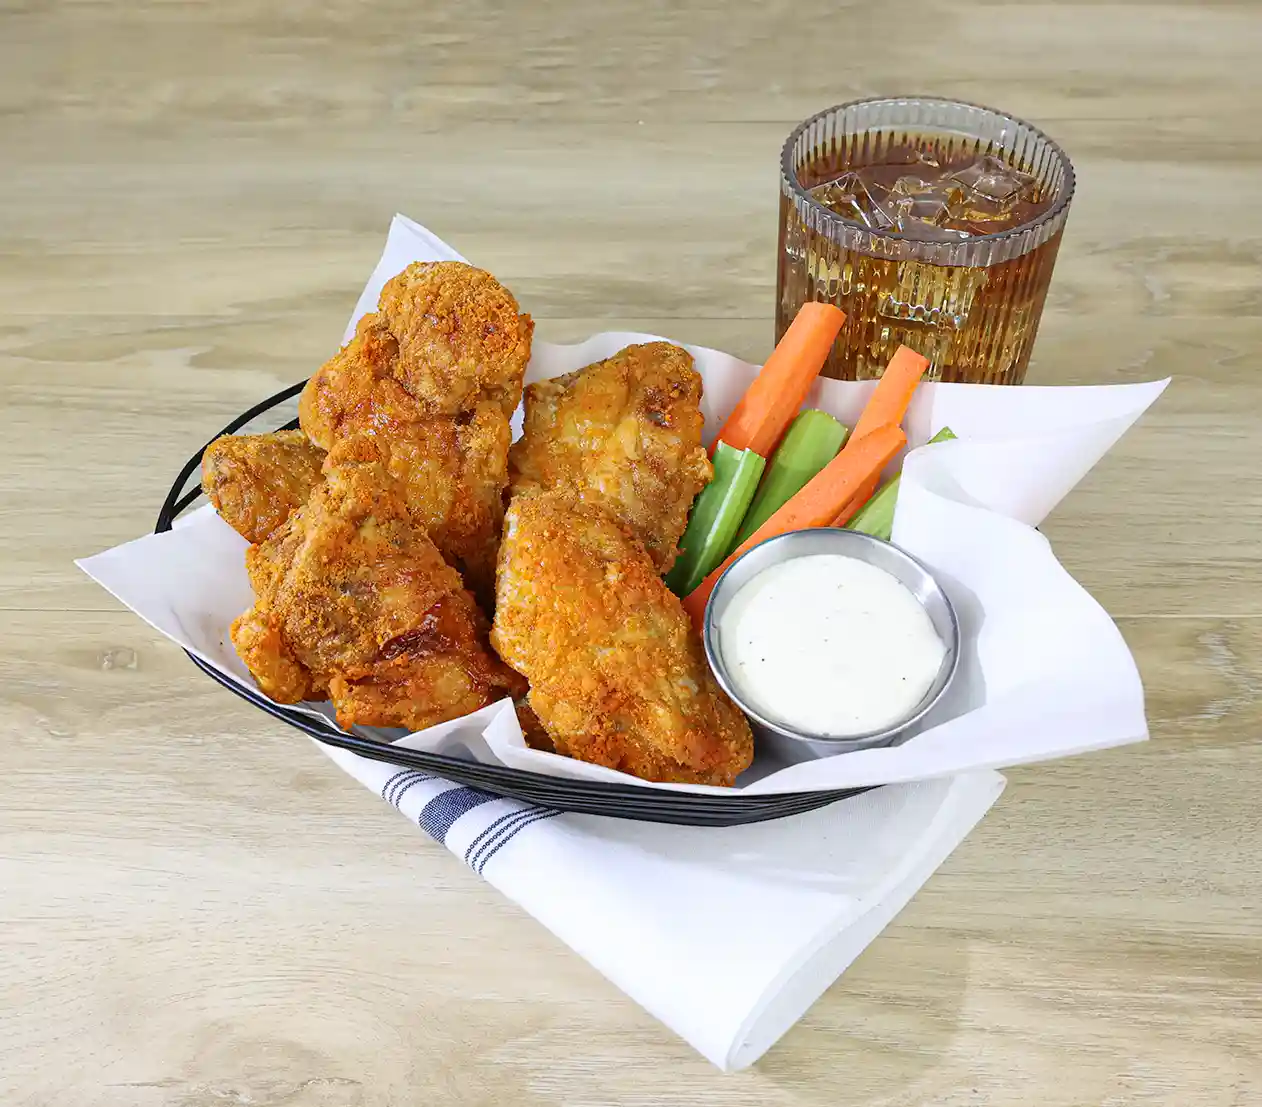 Tyson® IF Coated Bone-In Chicken Wing Sections, With Buffalo Ranch Seasoning Packets, Jumbohttps://images.salsify.com/image/upload/s--i75-rOll--/q_25/chdnbm3apajk5inum2yd.webp